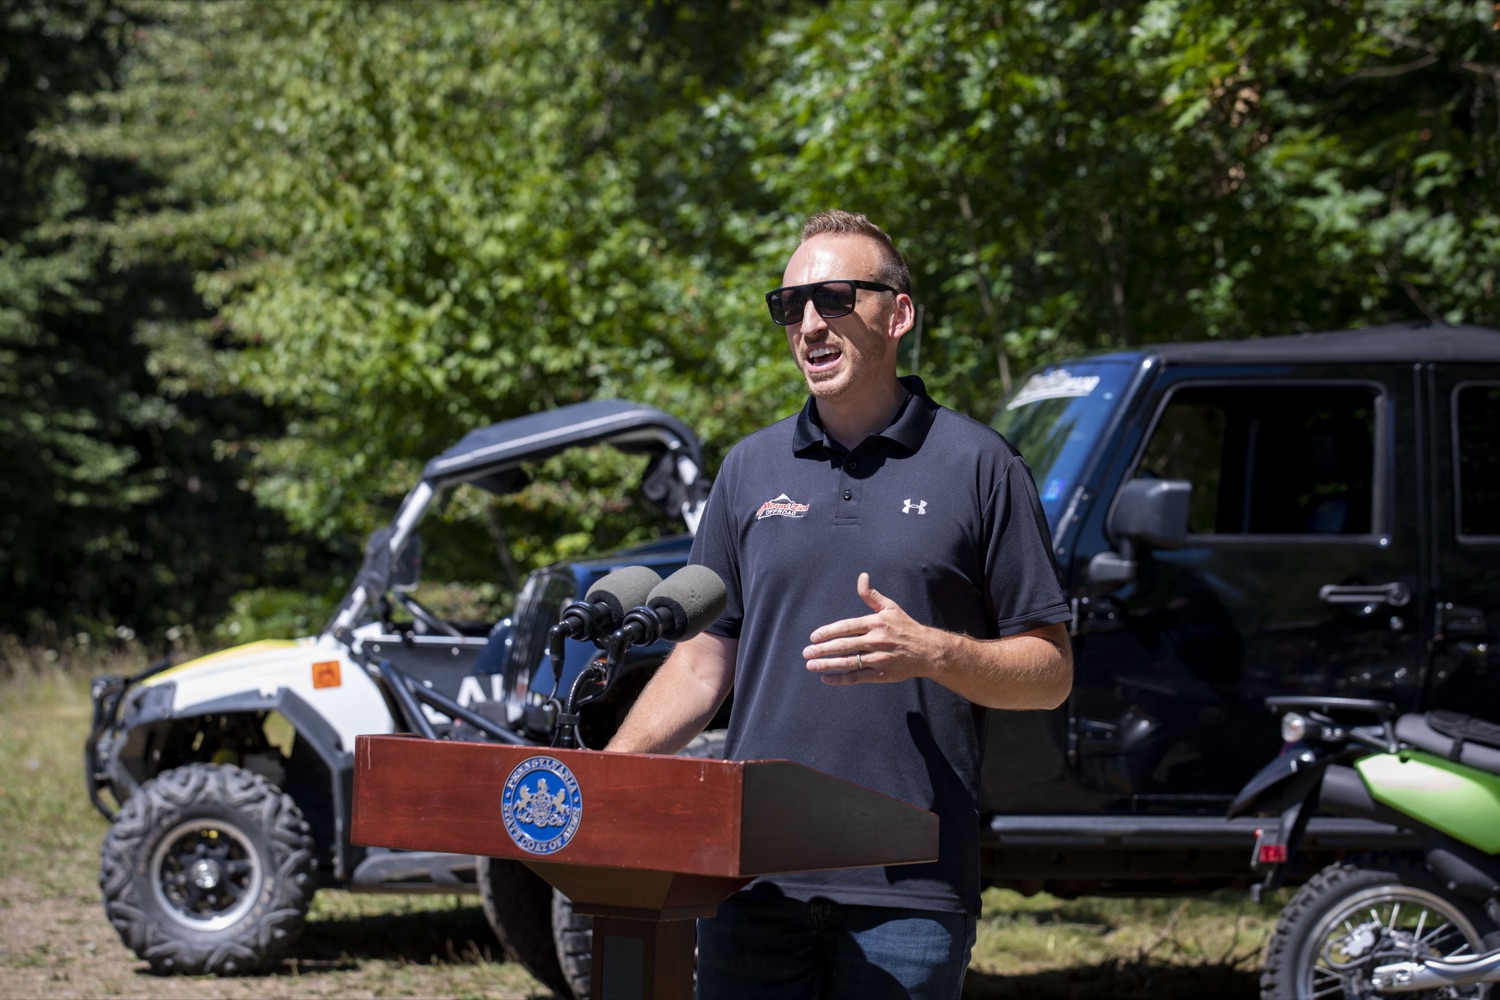 Mike Cashman of Mount Zion Offroad discusses the acquisition of a 5,600-acre tract of land that will be developed into a new motorized recreation area, in McAdoo, PA on August 12, 2022.<br><a href="https://filesource.amperwave.net/commonwealthofpa/photo/22090_dcnr_RecreationArea_25.jpg" target="_blank">⇣ Download Photo</a>